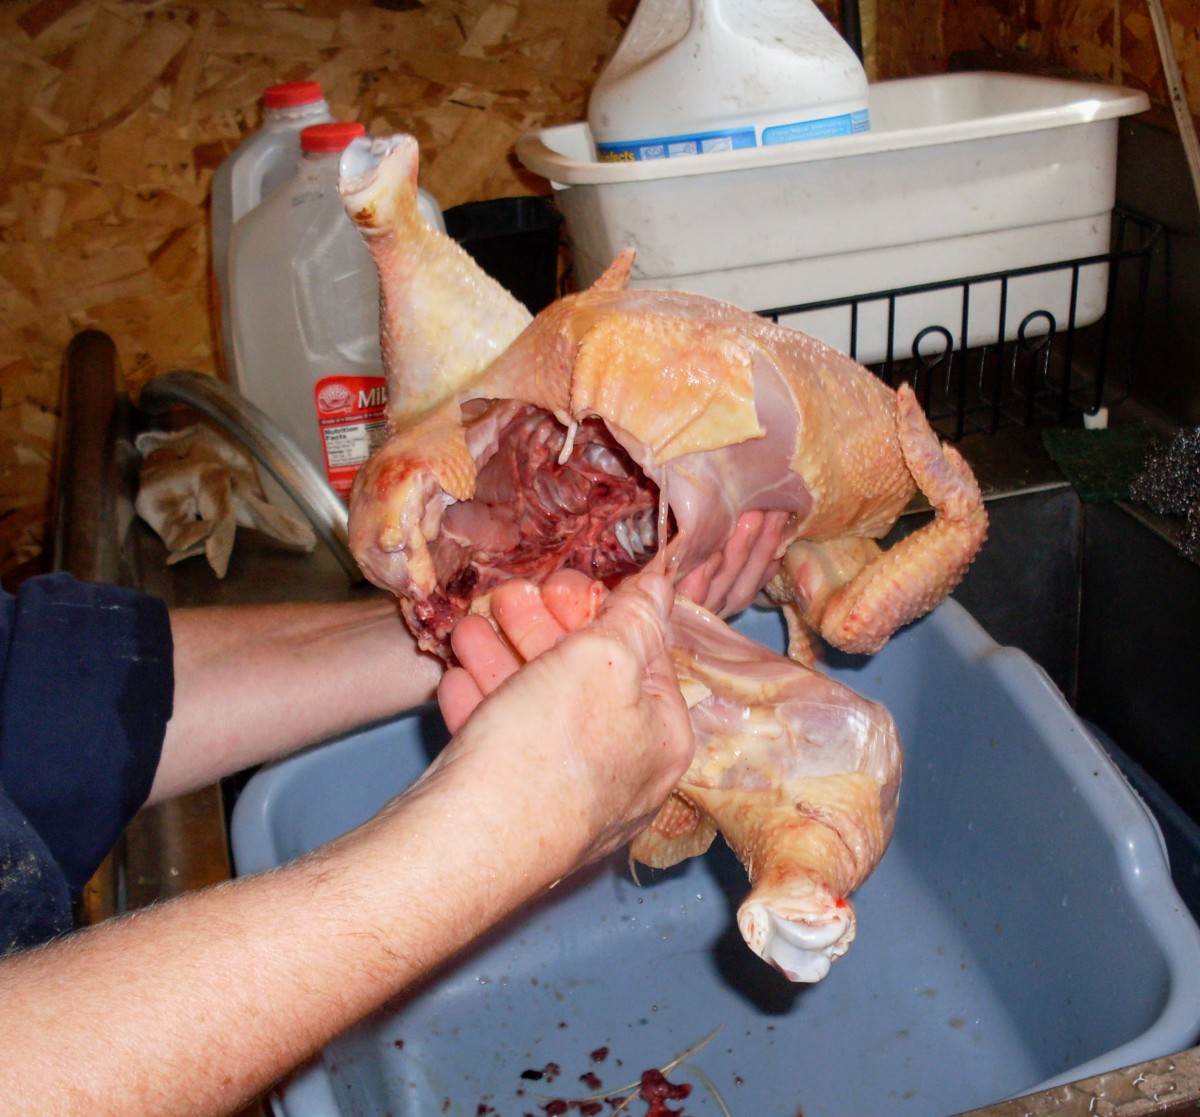 Next, scrape out any lung portions that didn't come earlier. After a soak, they usually come quickly and easily.